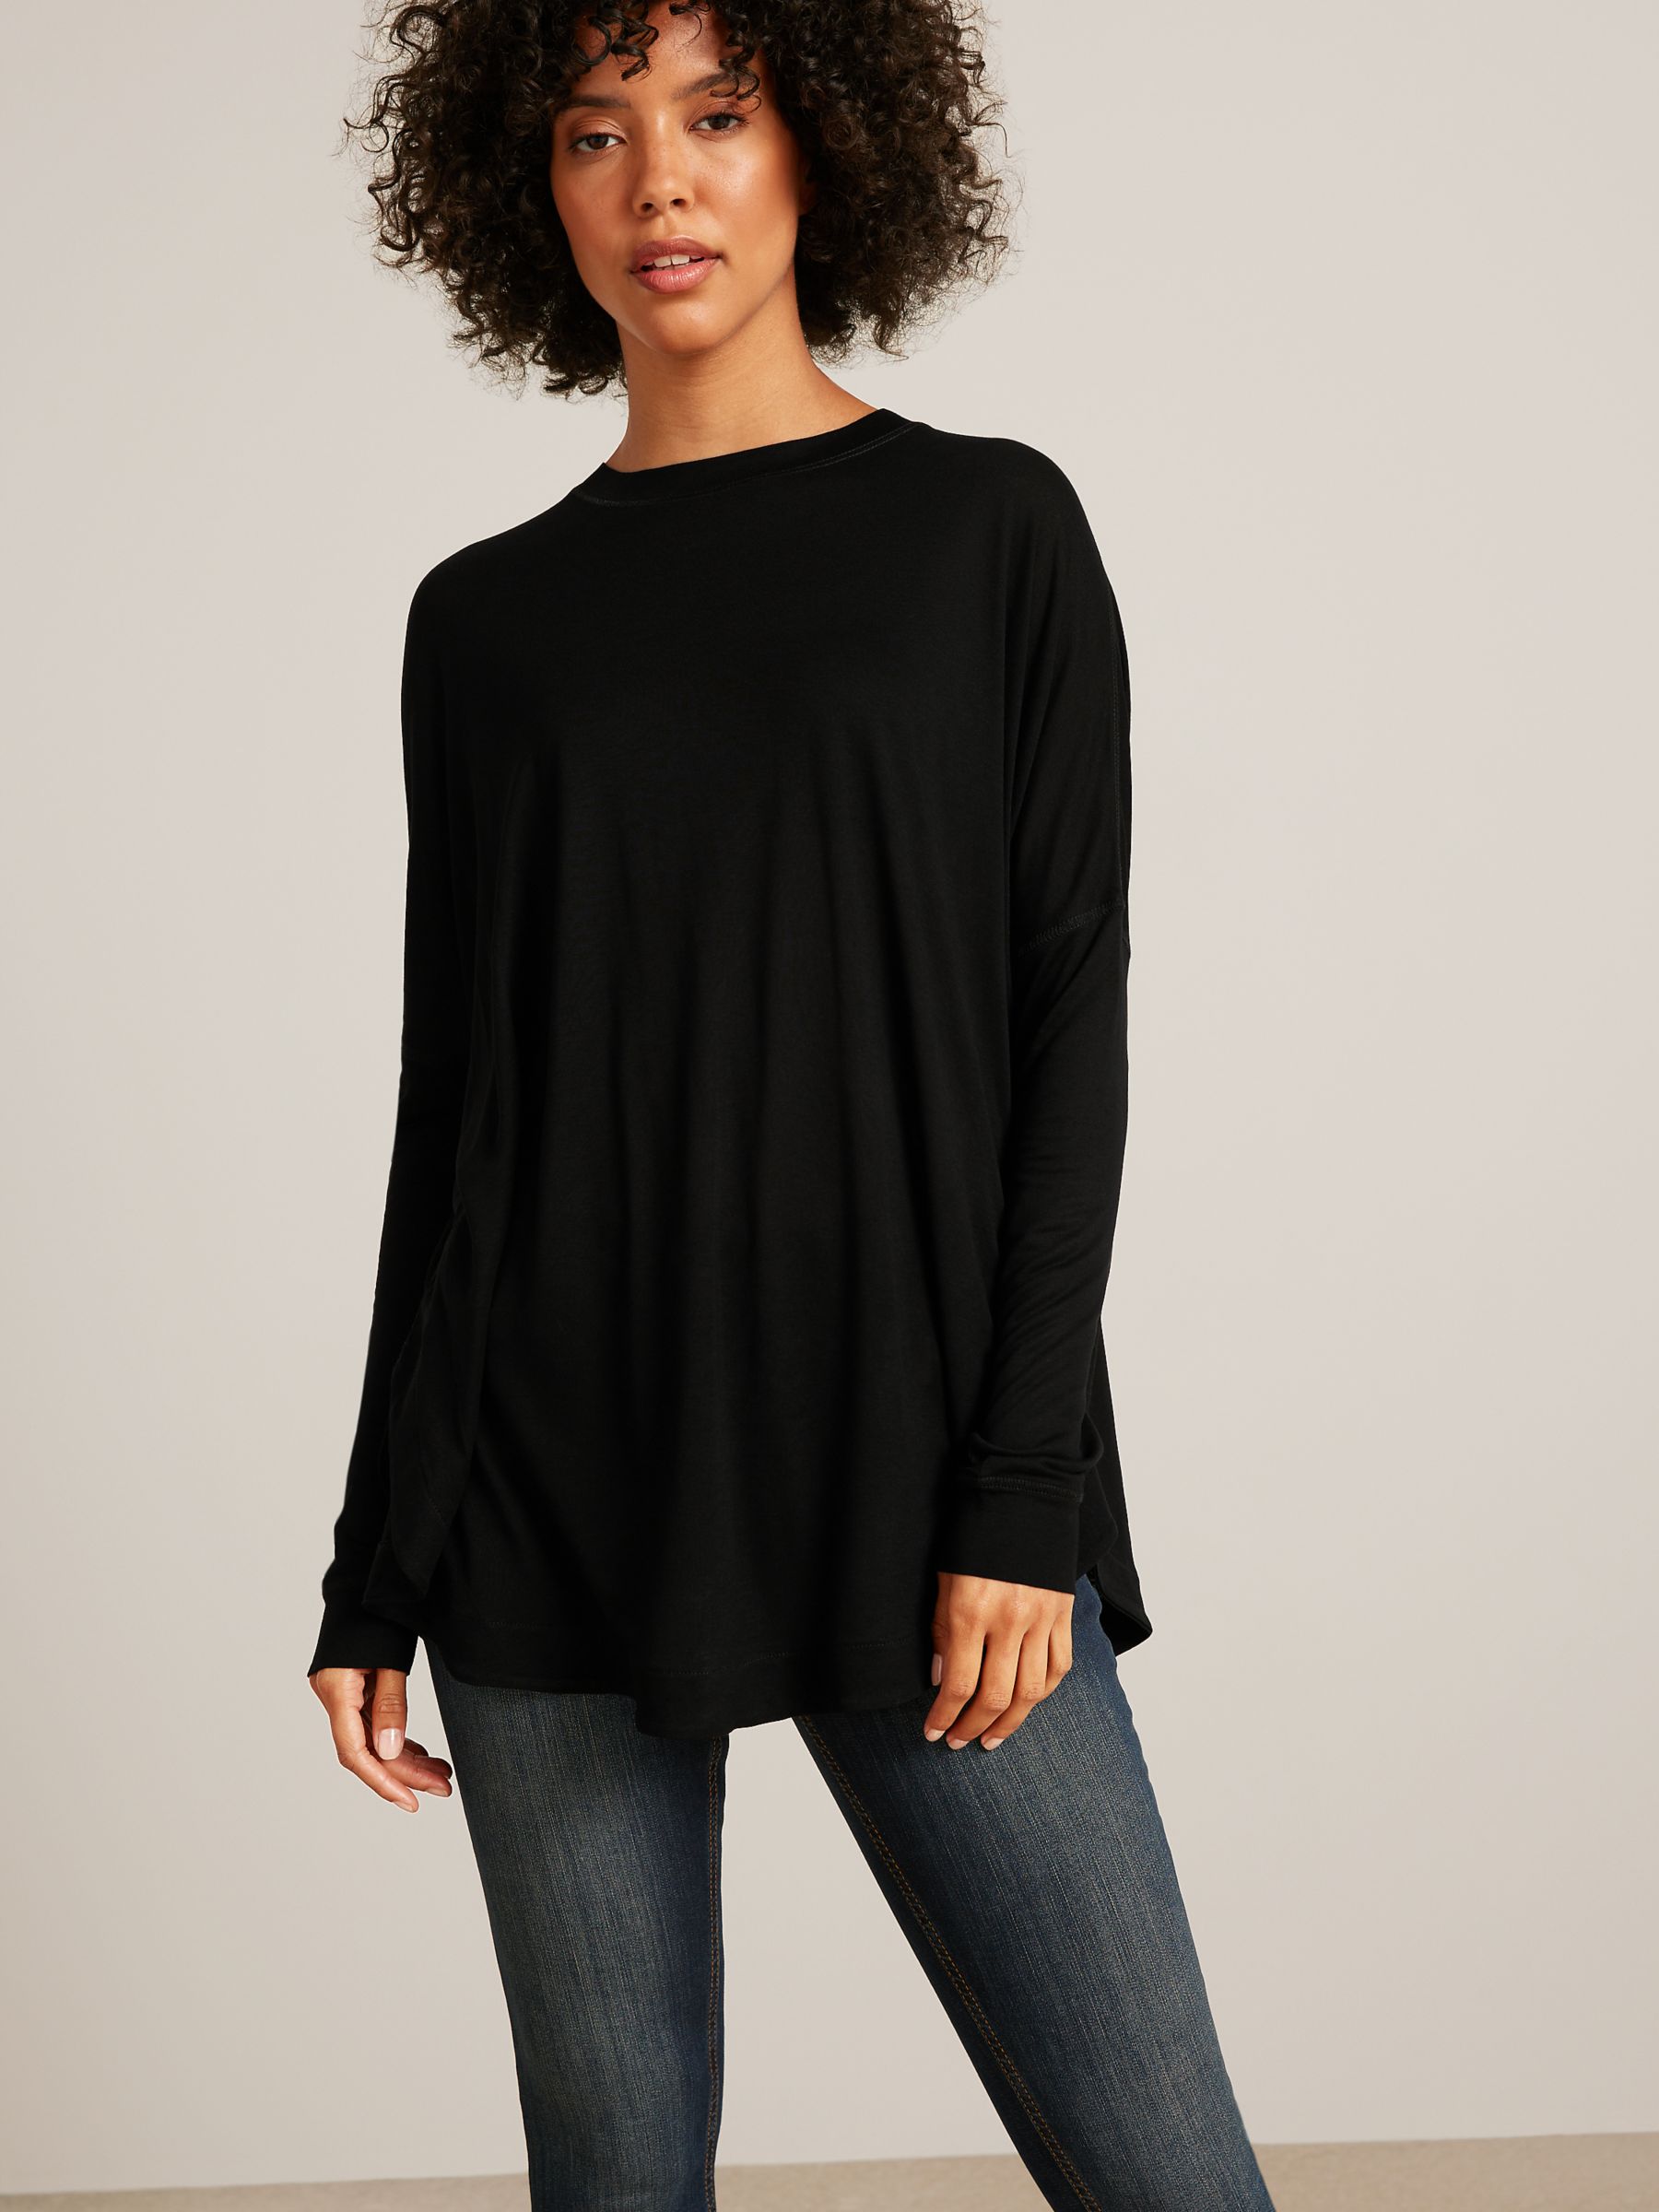 AND/OR Orla Long Sleeve Jersey Top, Black at John Lewis & Partners